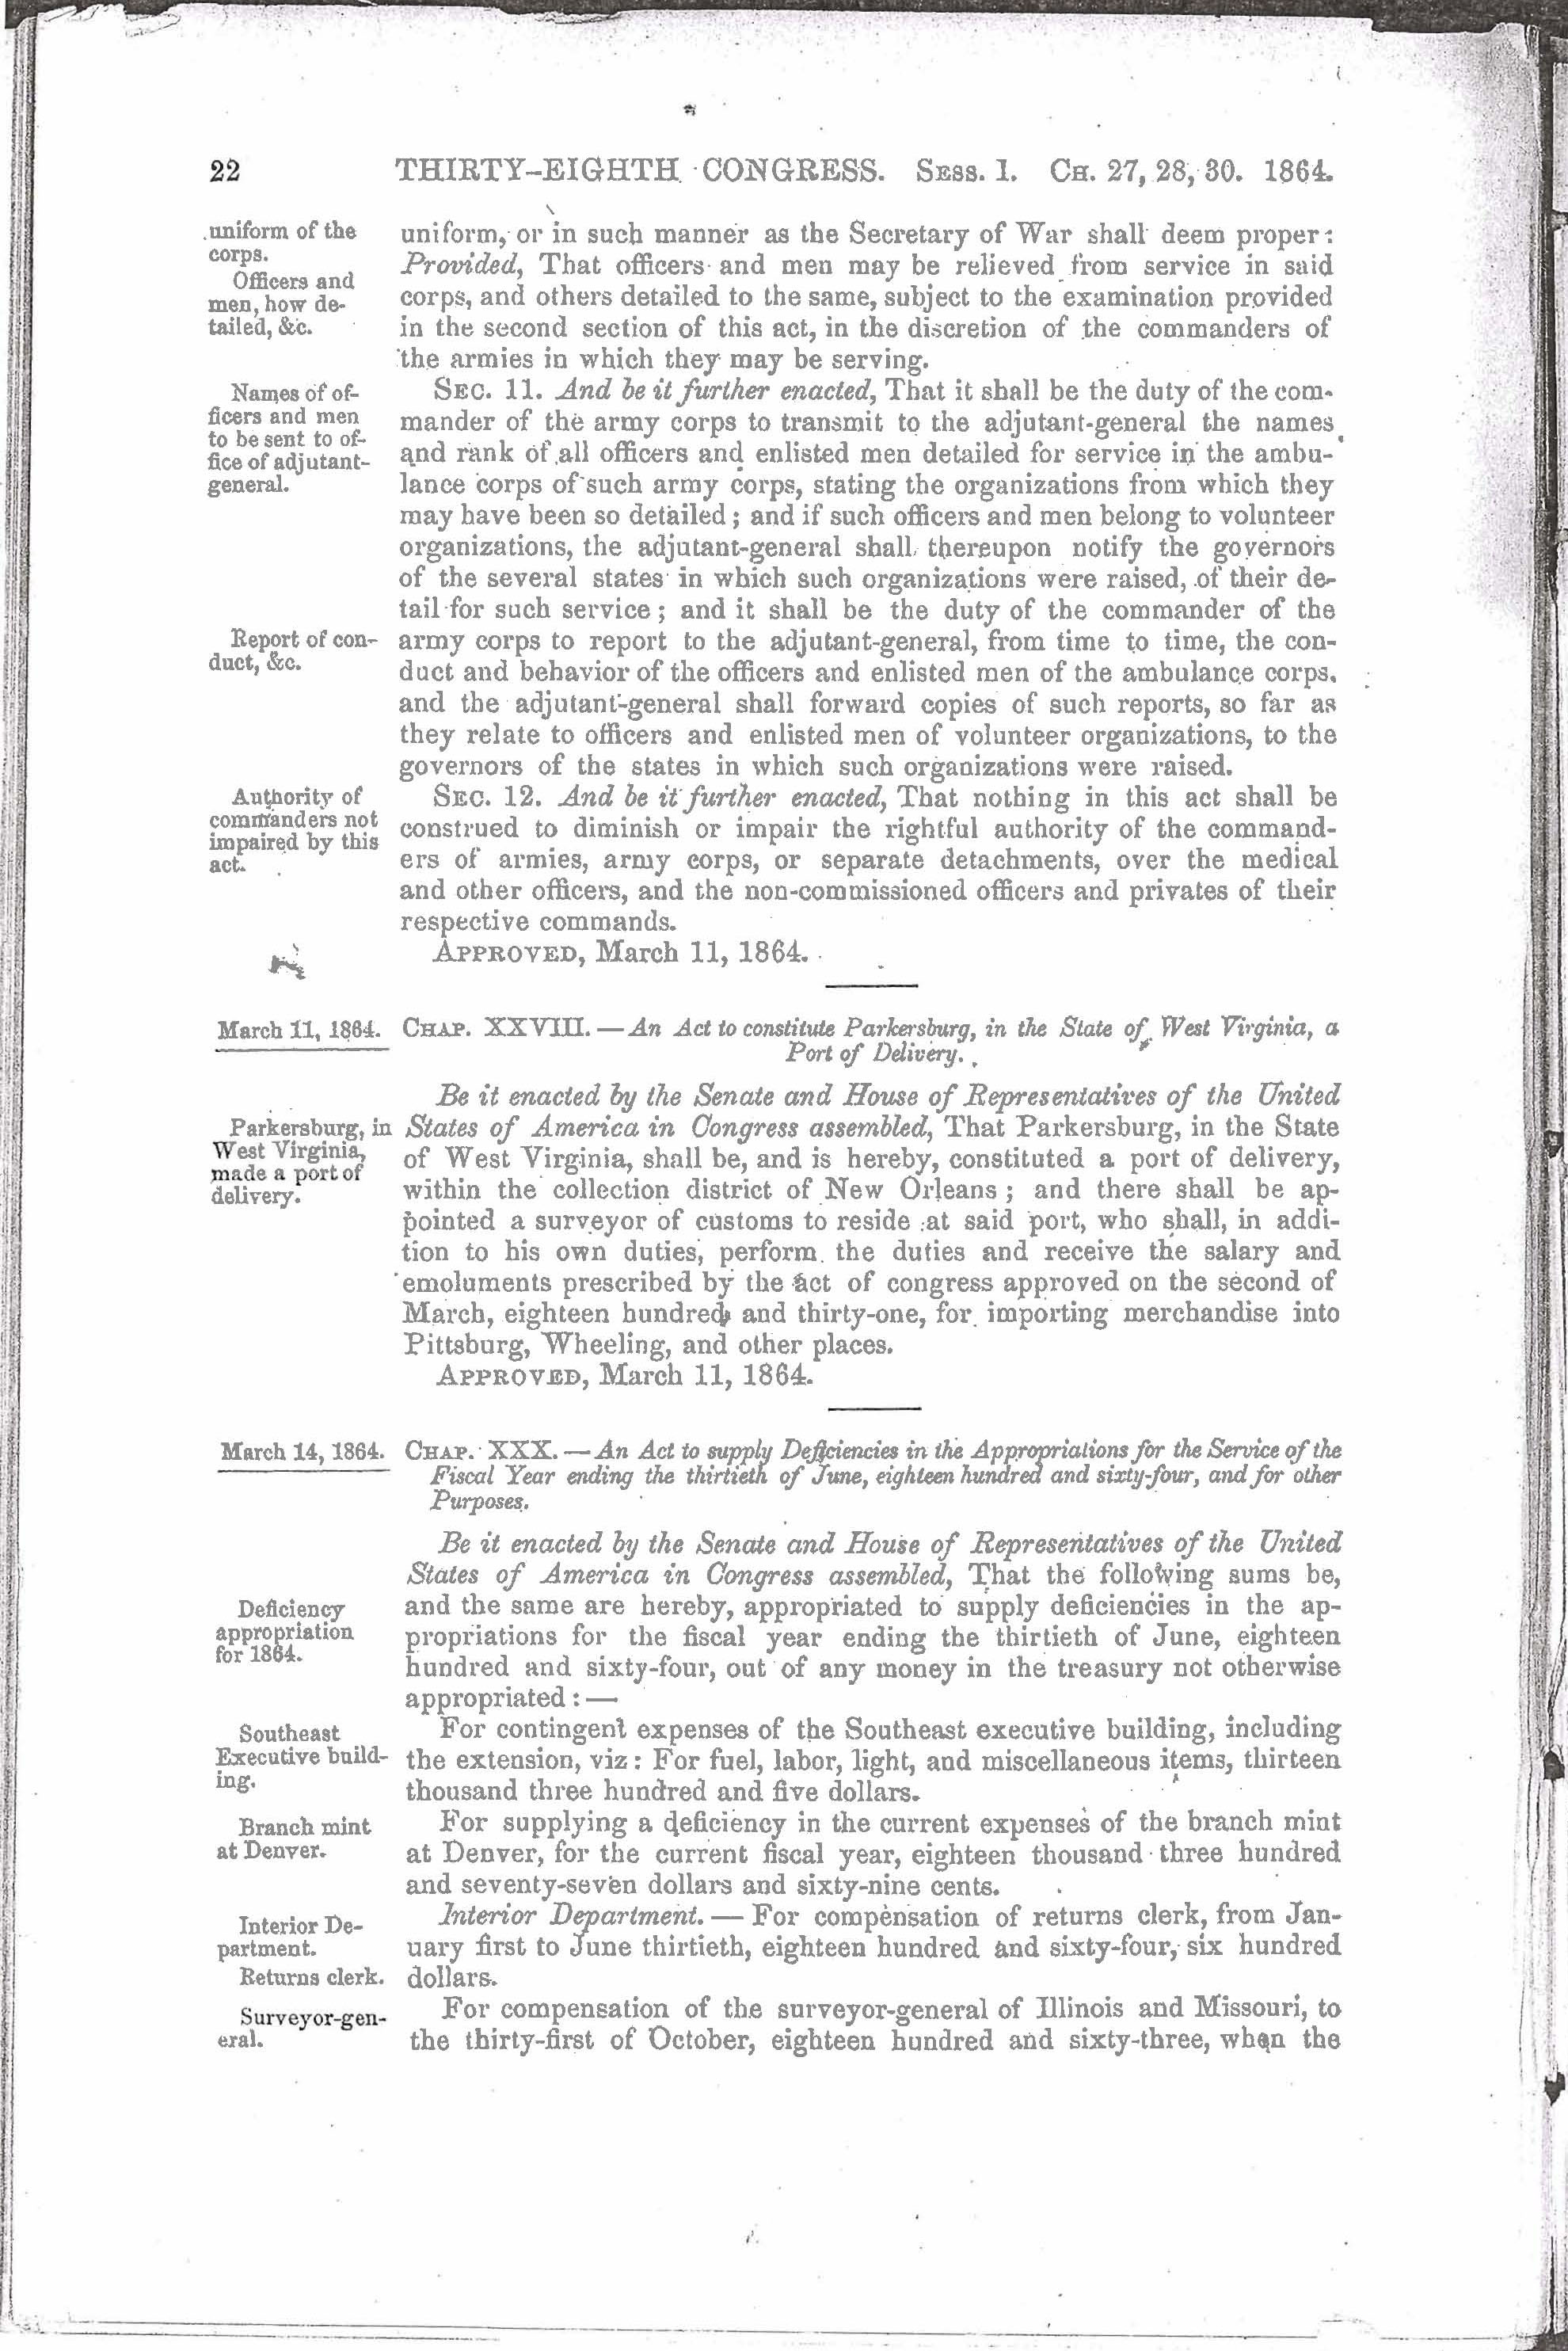 Act of Congress Authorizing Construction of the Washington Naval  Hospital, Page 1 of 7